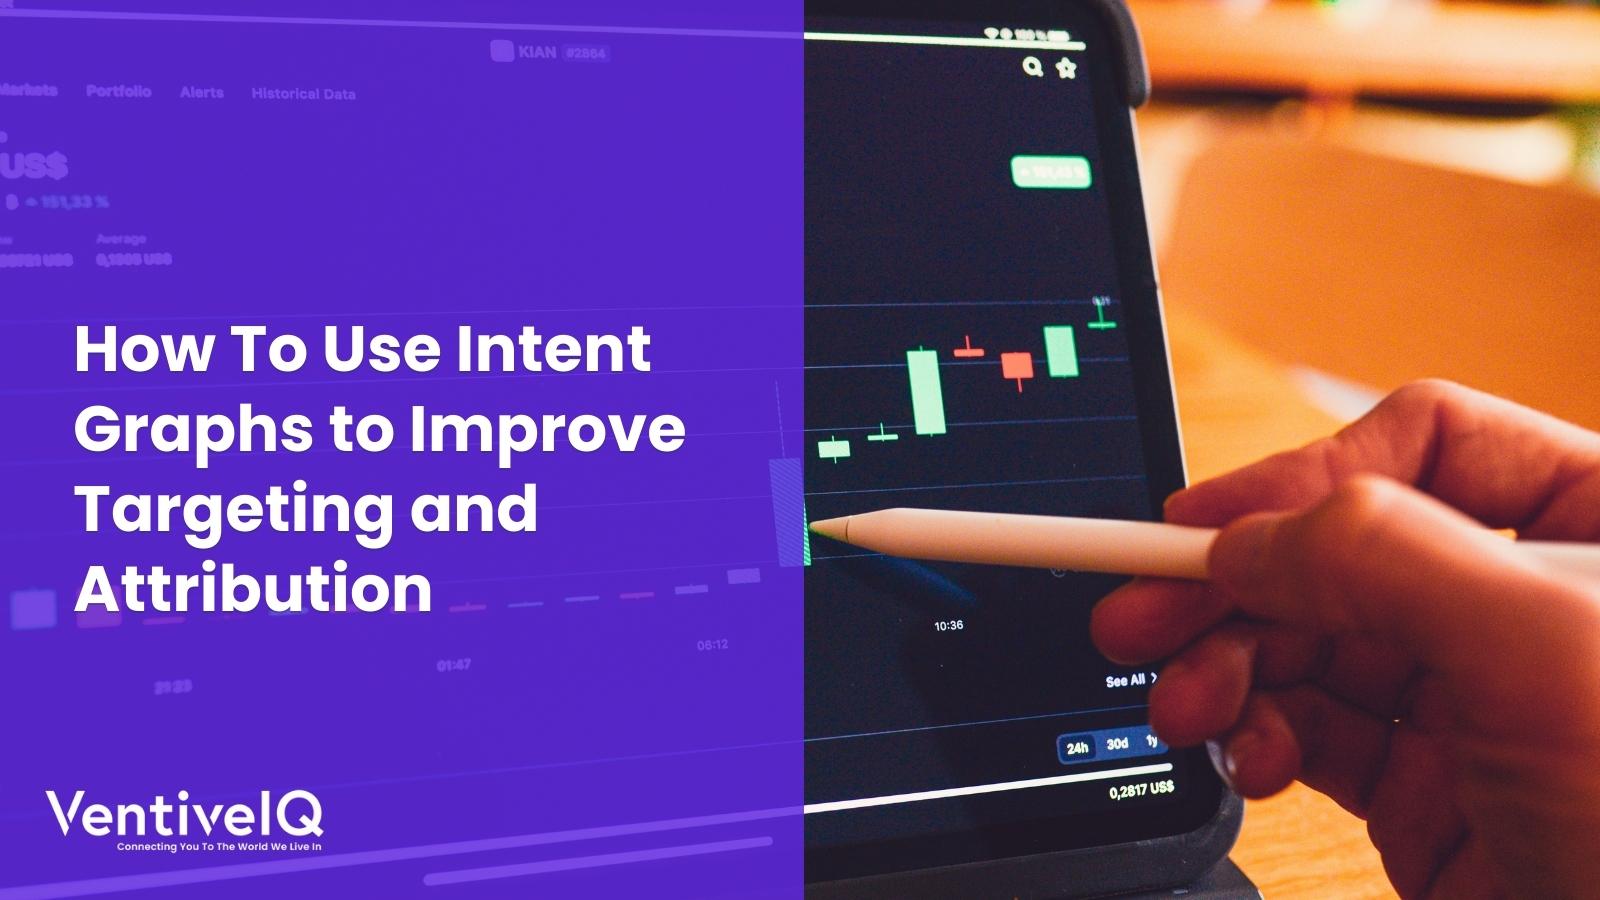 How To Use Intent Graphs to Improve Targeting and Attribution